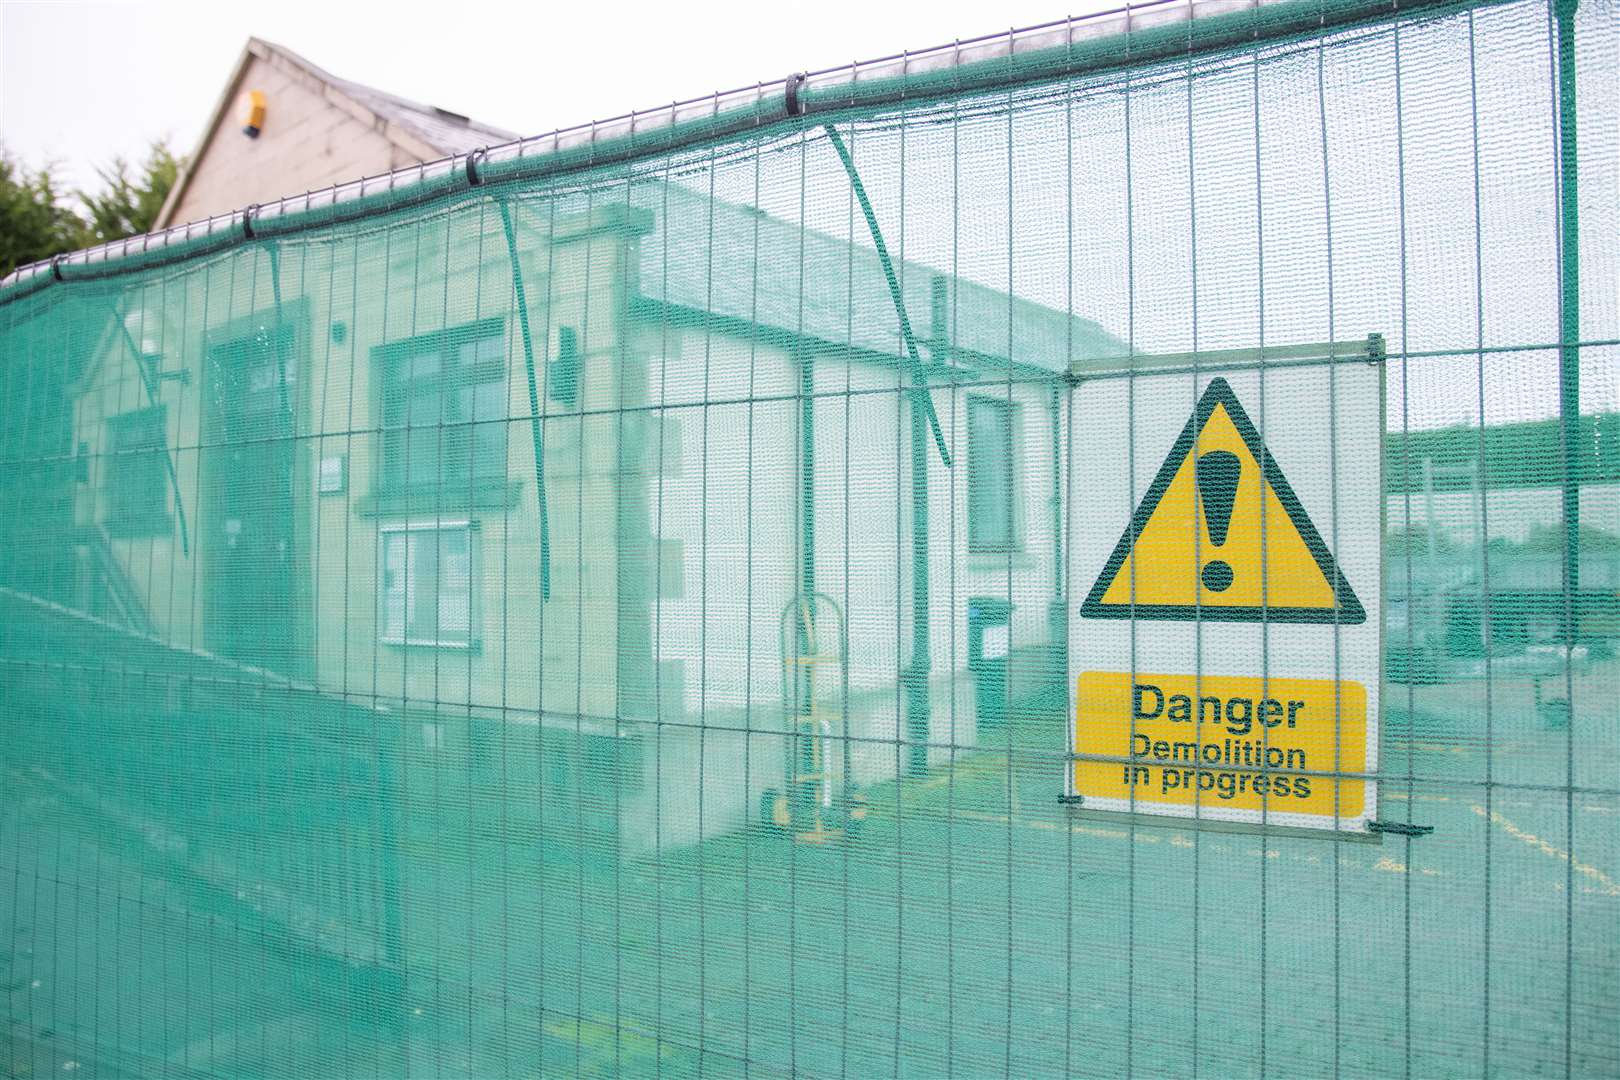 The campaign group discovered the GP surgery has been fenced off in preparation for demolition on Saturday morning. Picture: Daniel Forsyth